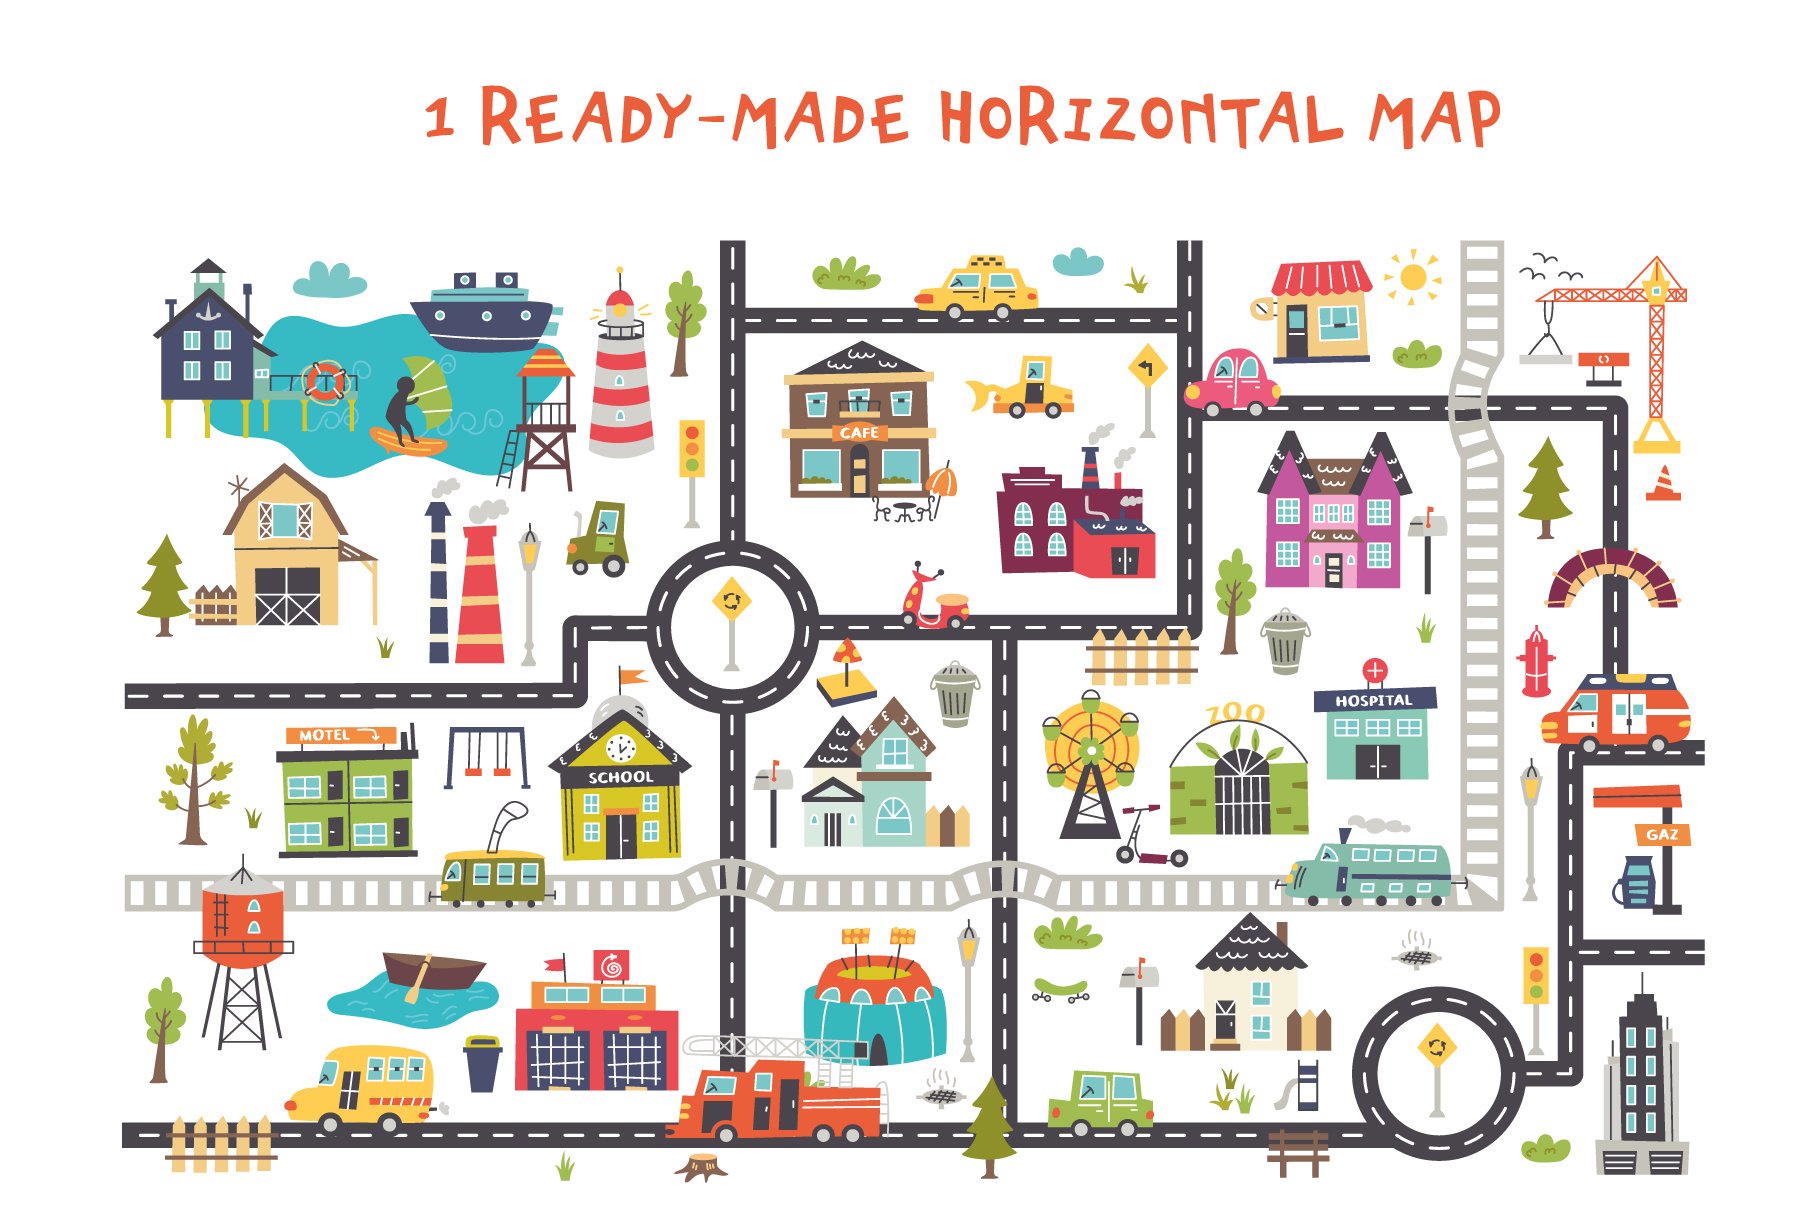 City Map For Kids